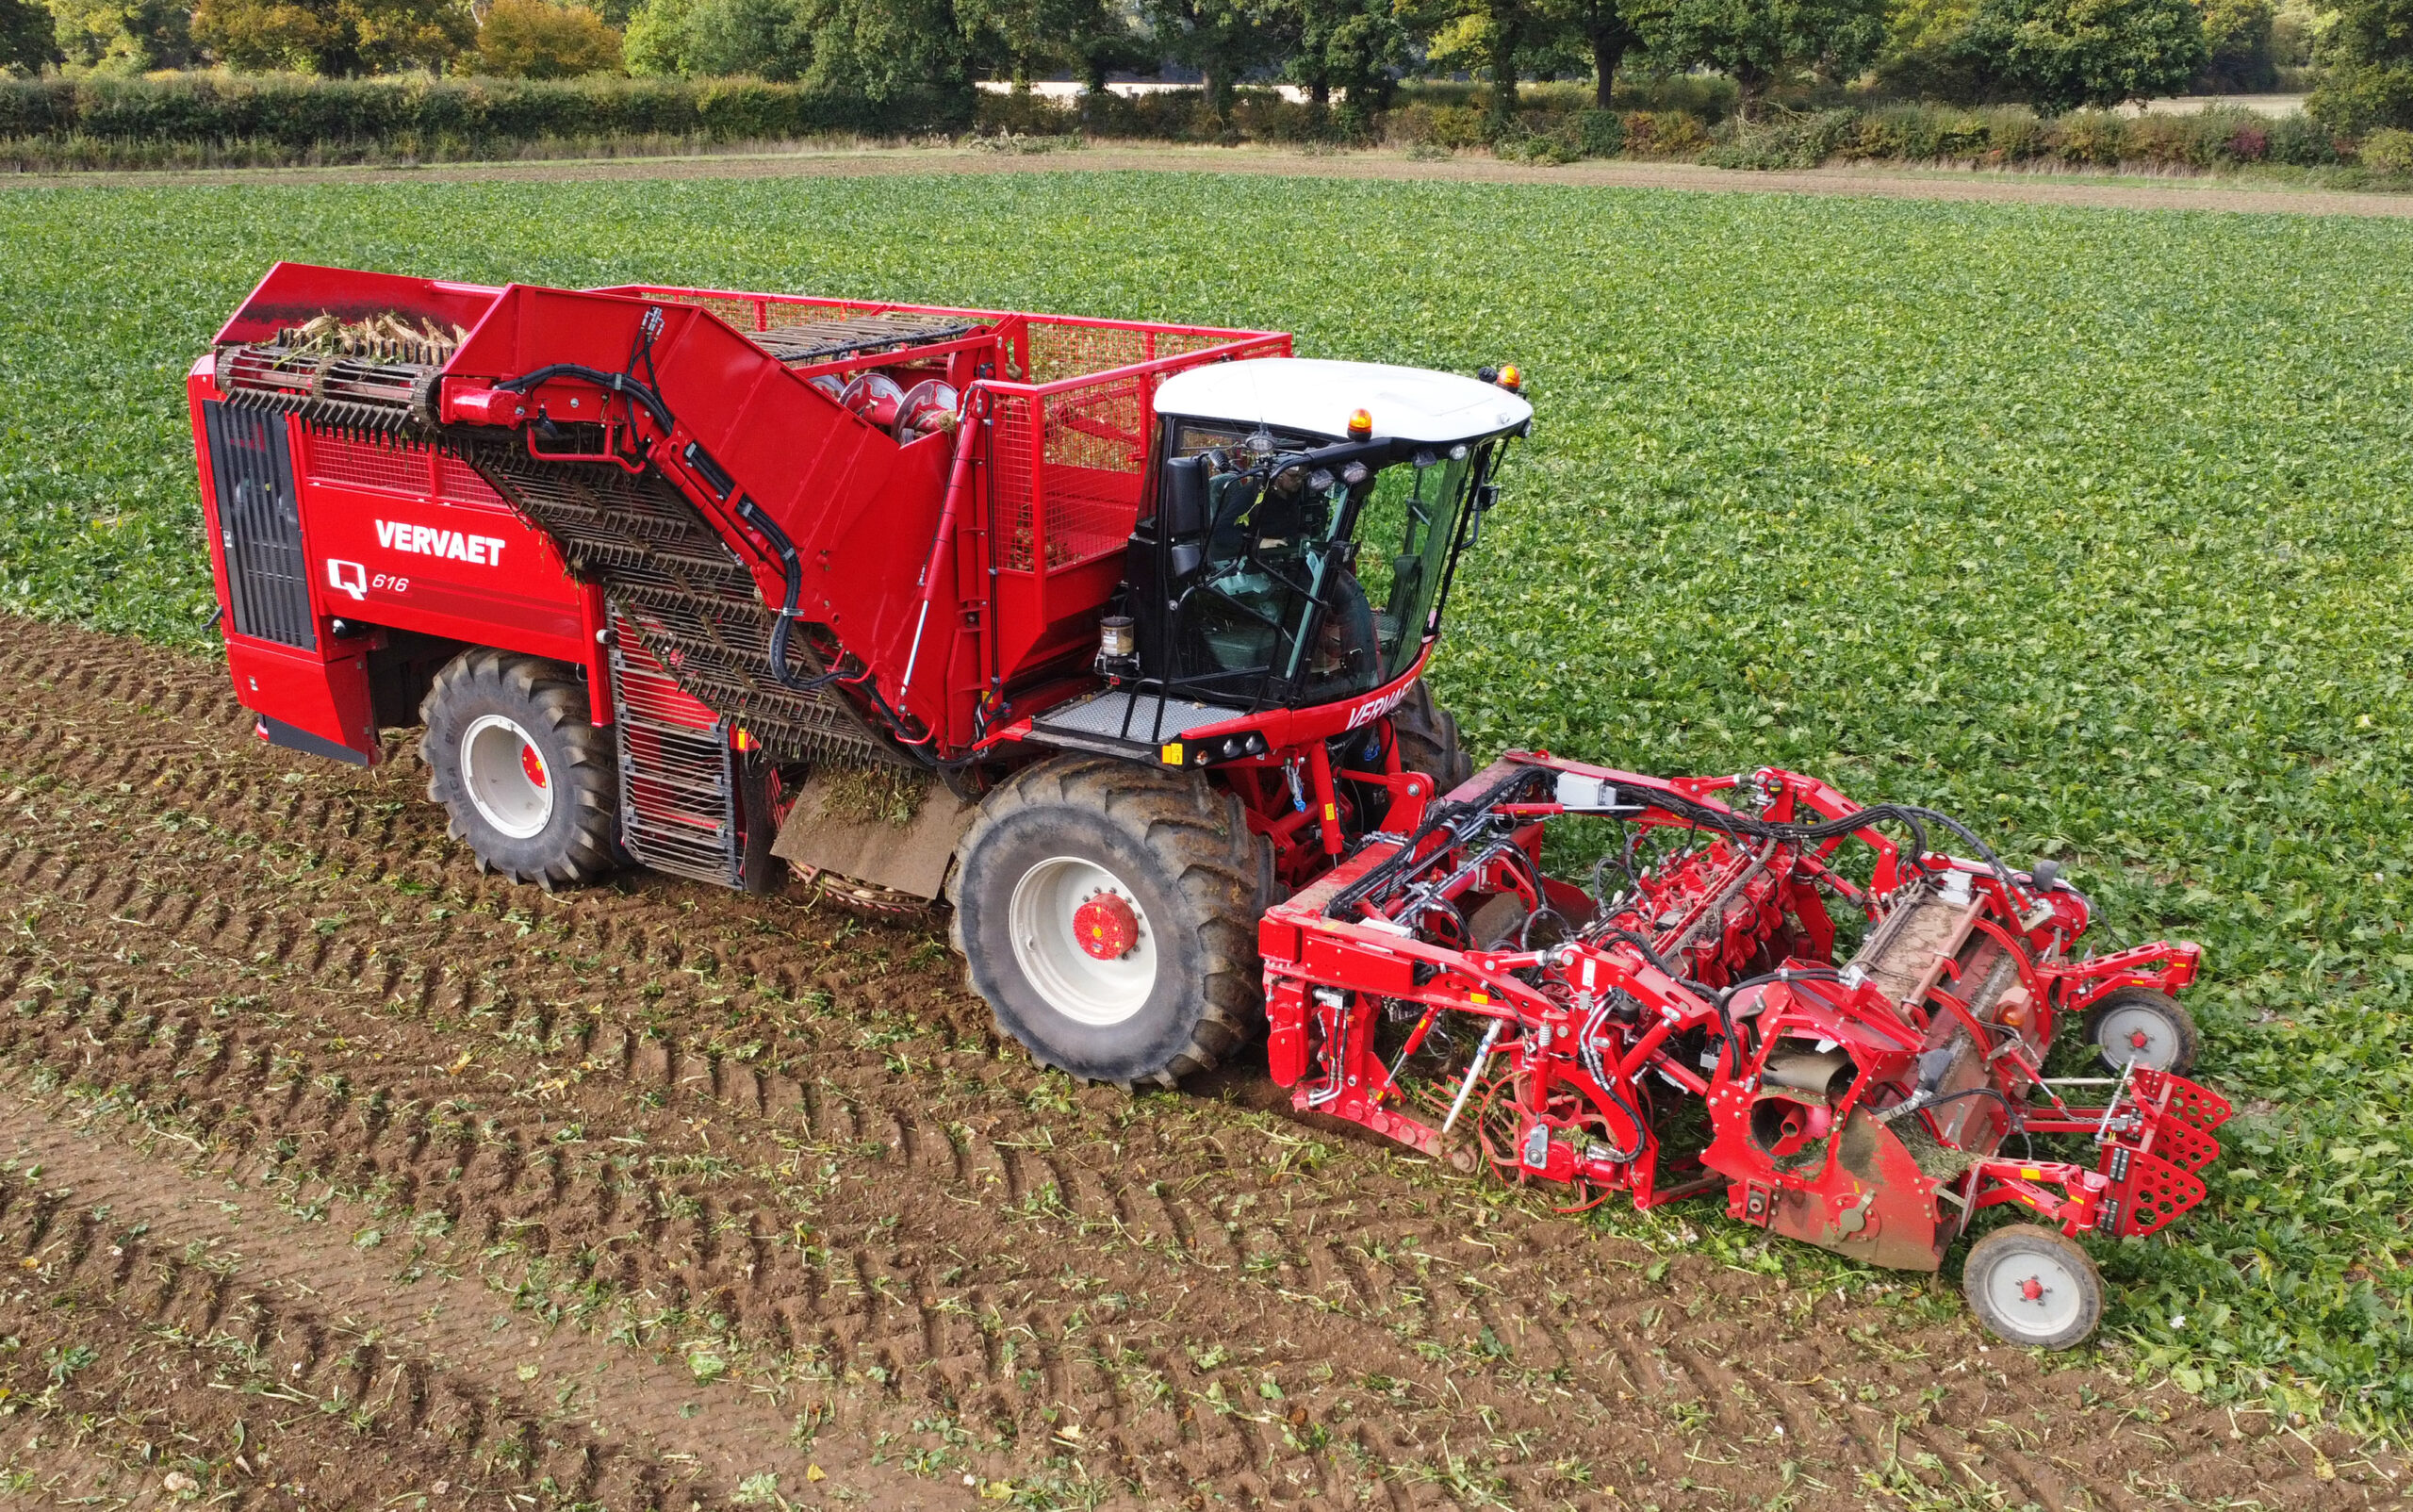 New rollerbed option for vervaet machinery